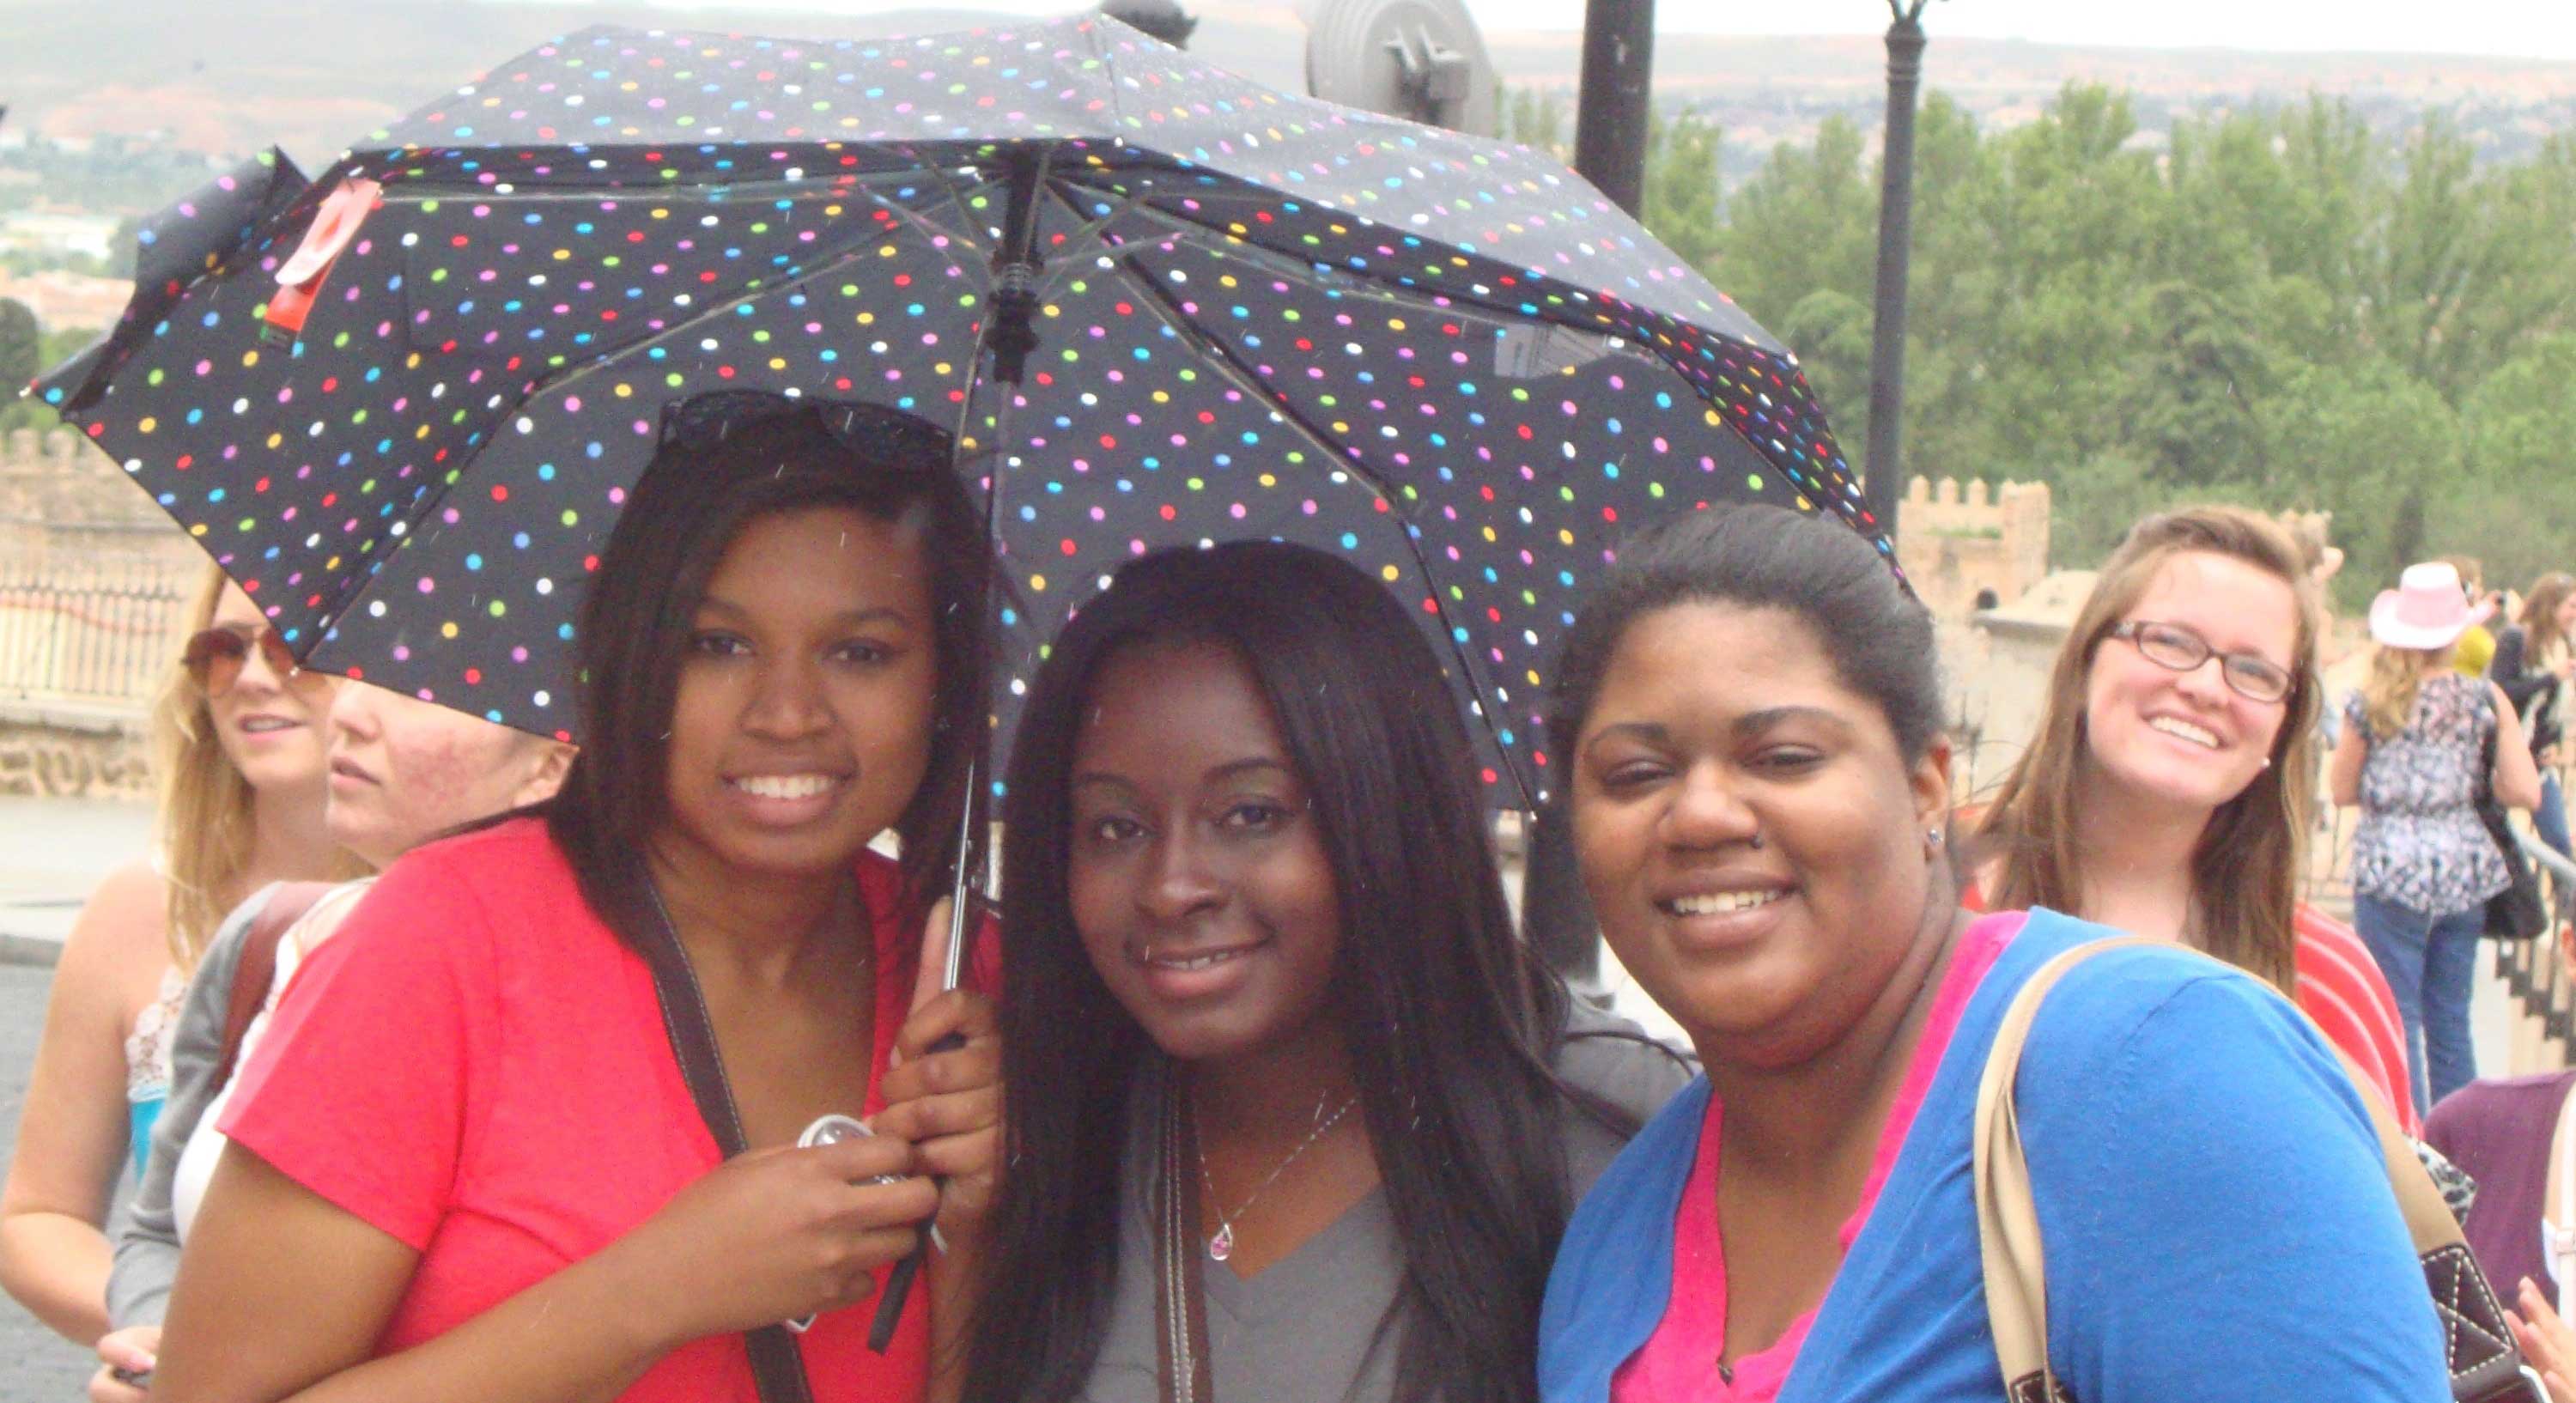 Three students in Spain with umbrella.